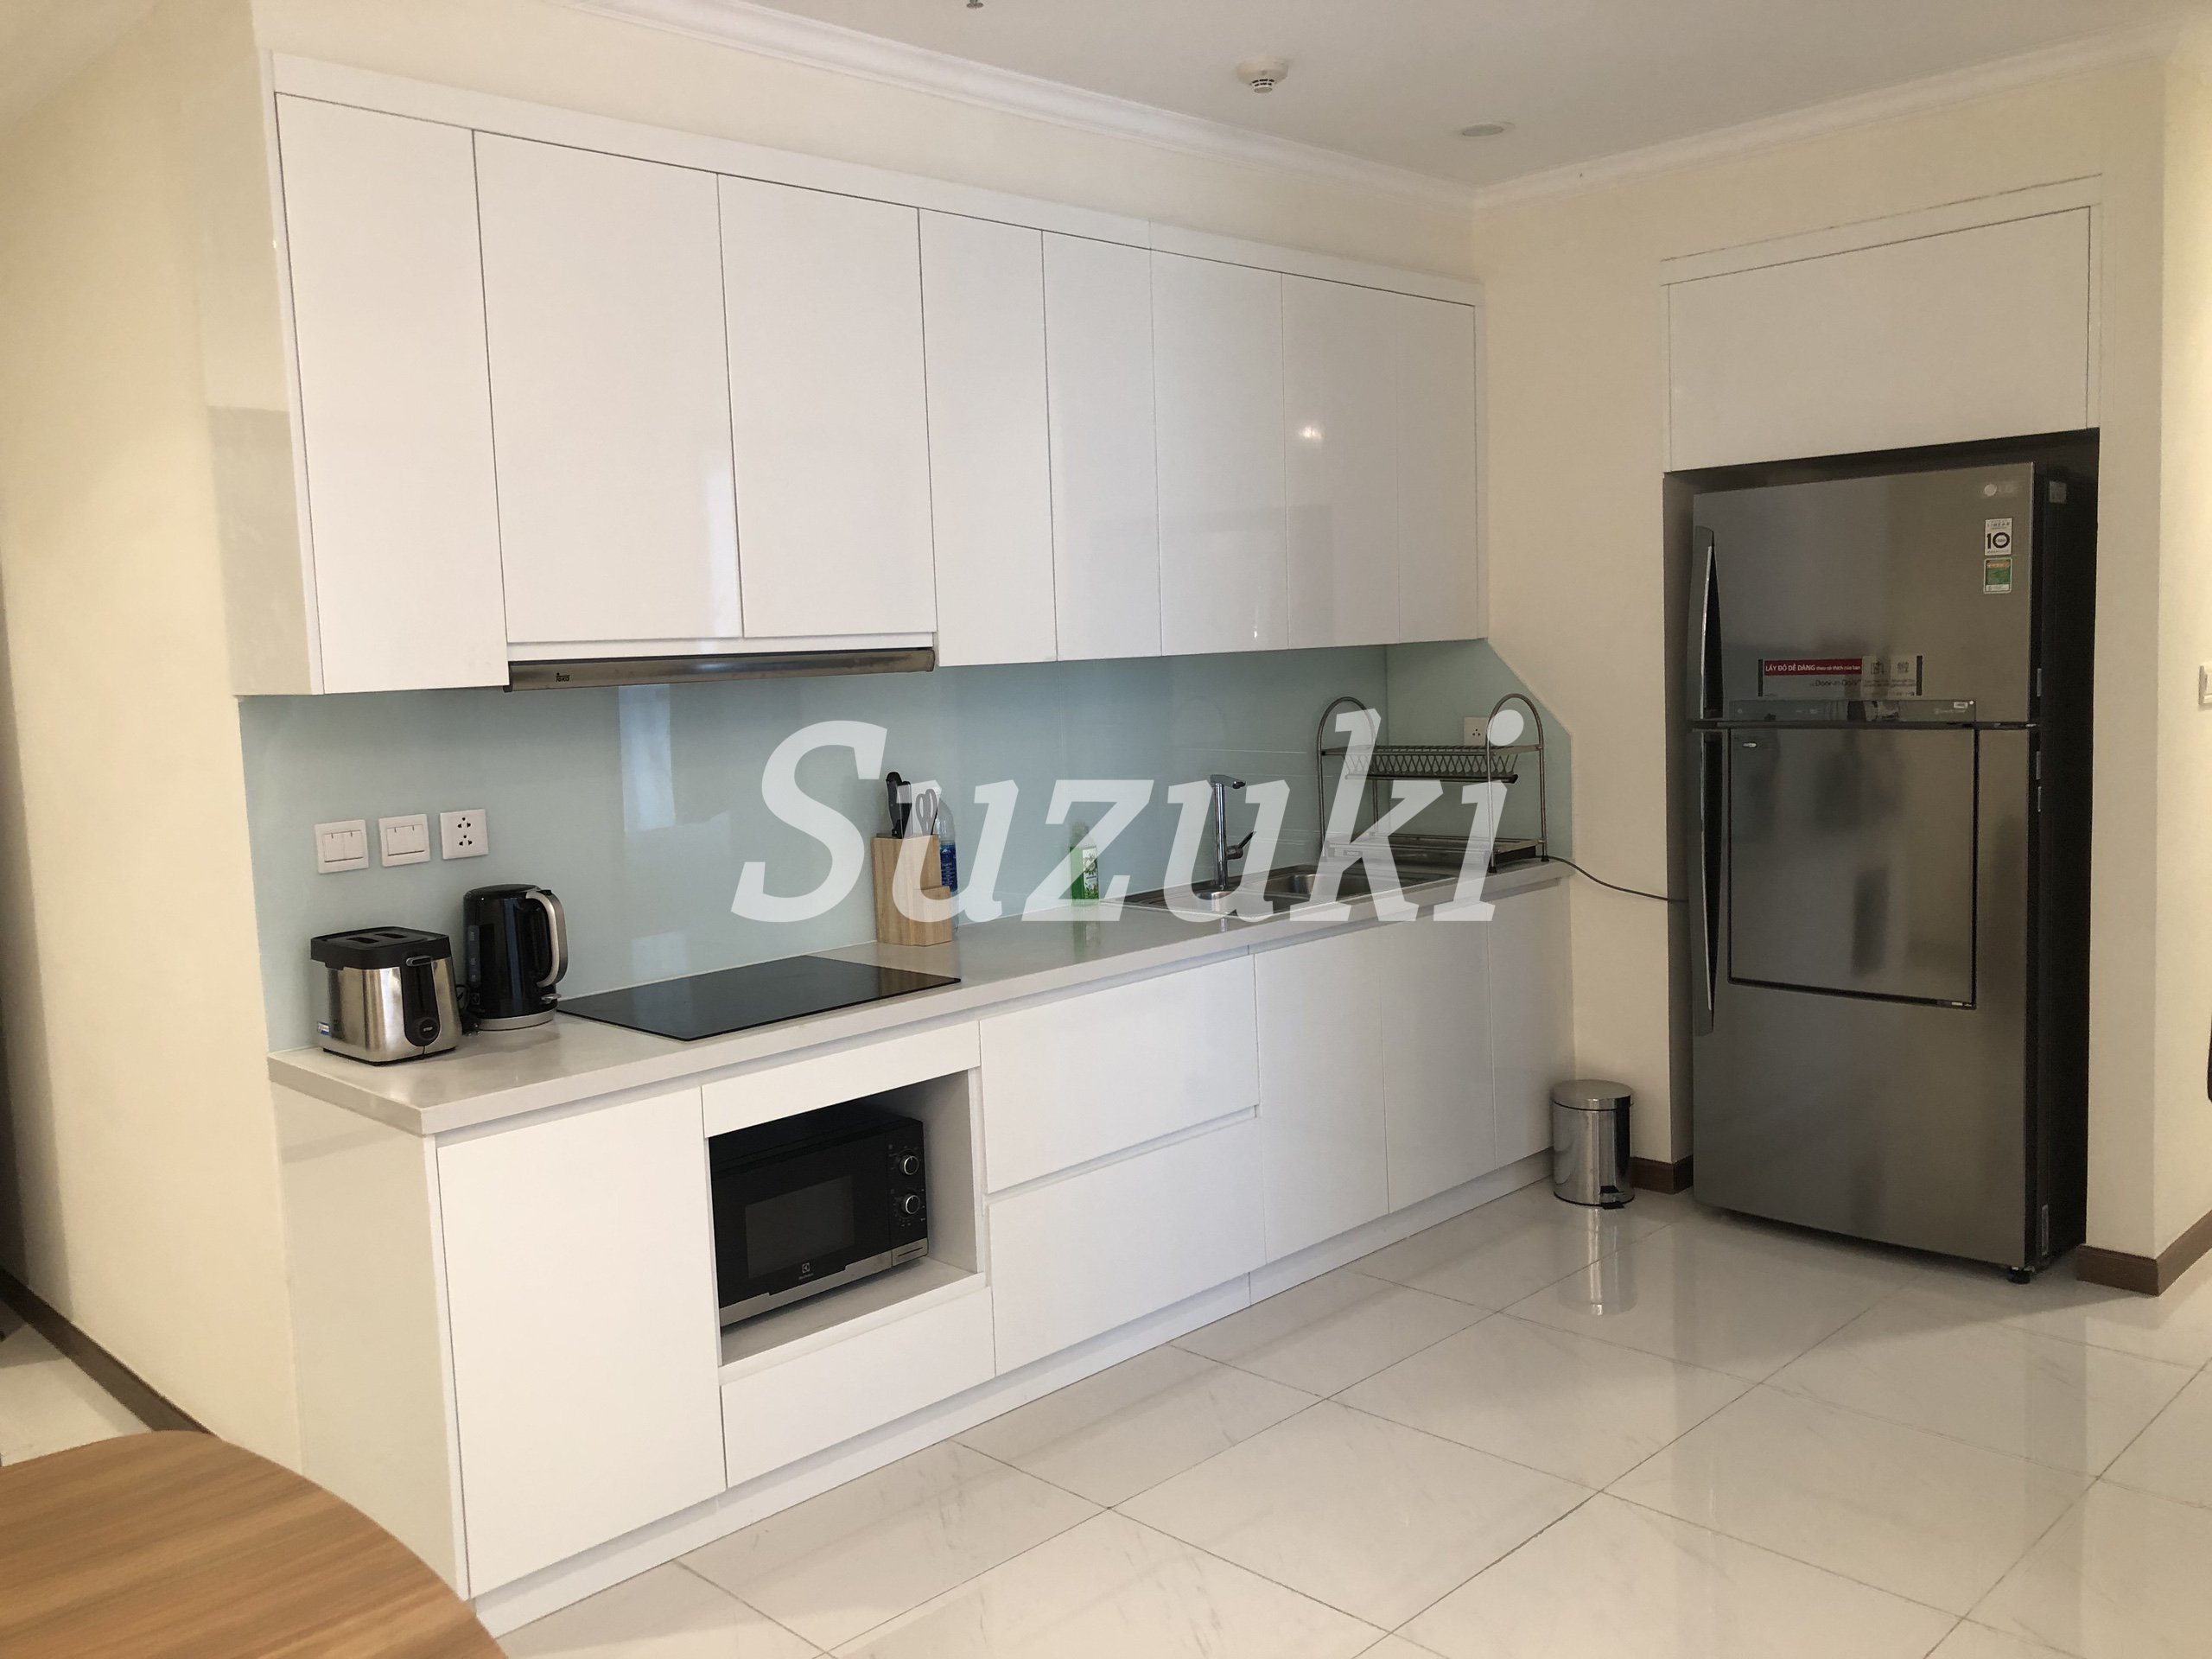 2LDK for rent 72 square meters-1000$-ST105L6321 | Condominium popular among foreigners in Vinhomes Central Park, Ho Chi Minh City